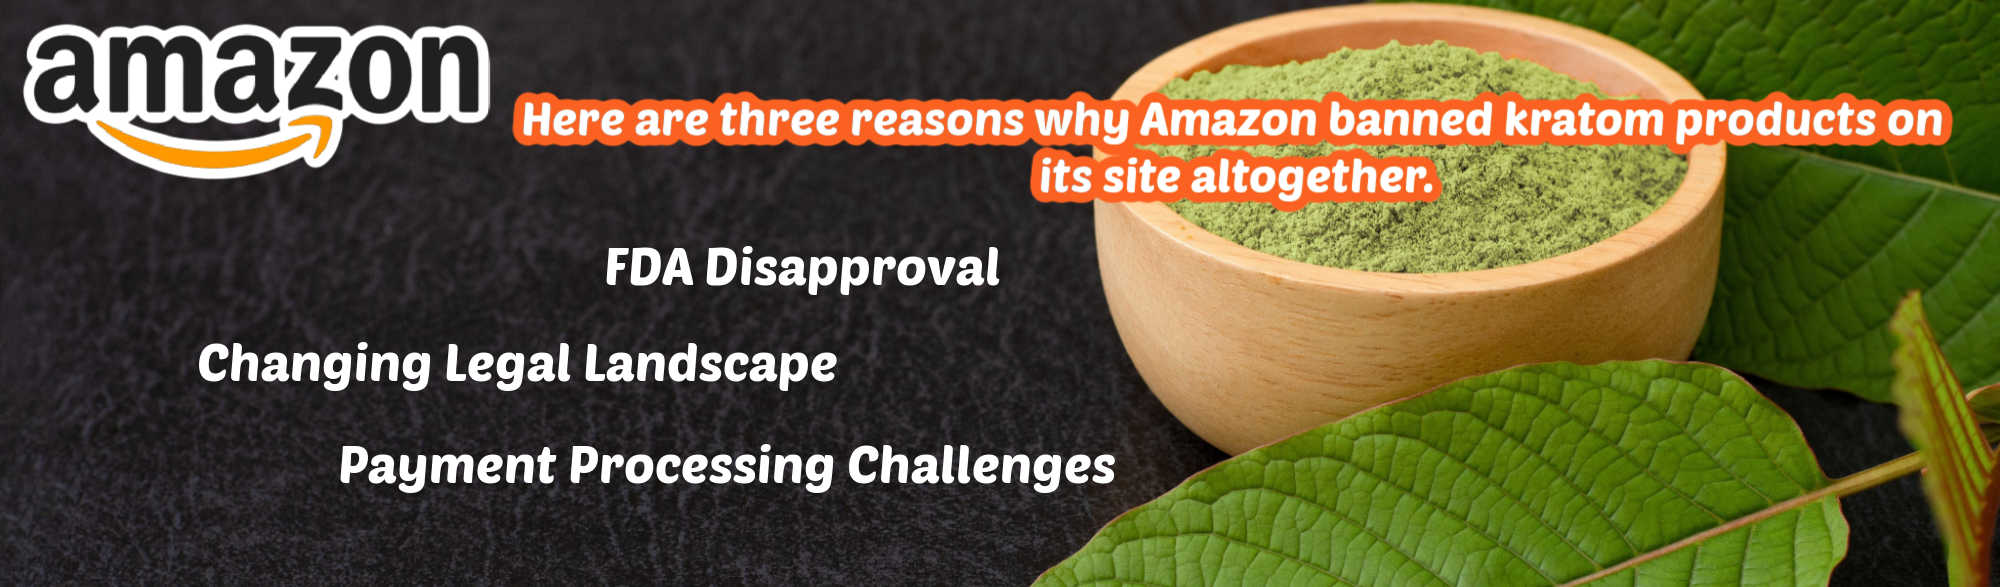 image of three reasons why amazon banned kratom products